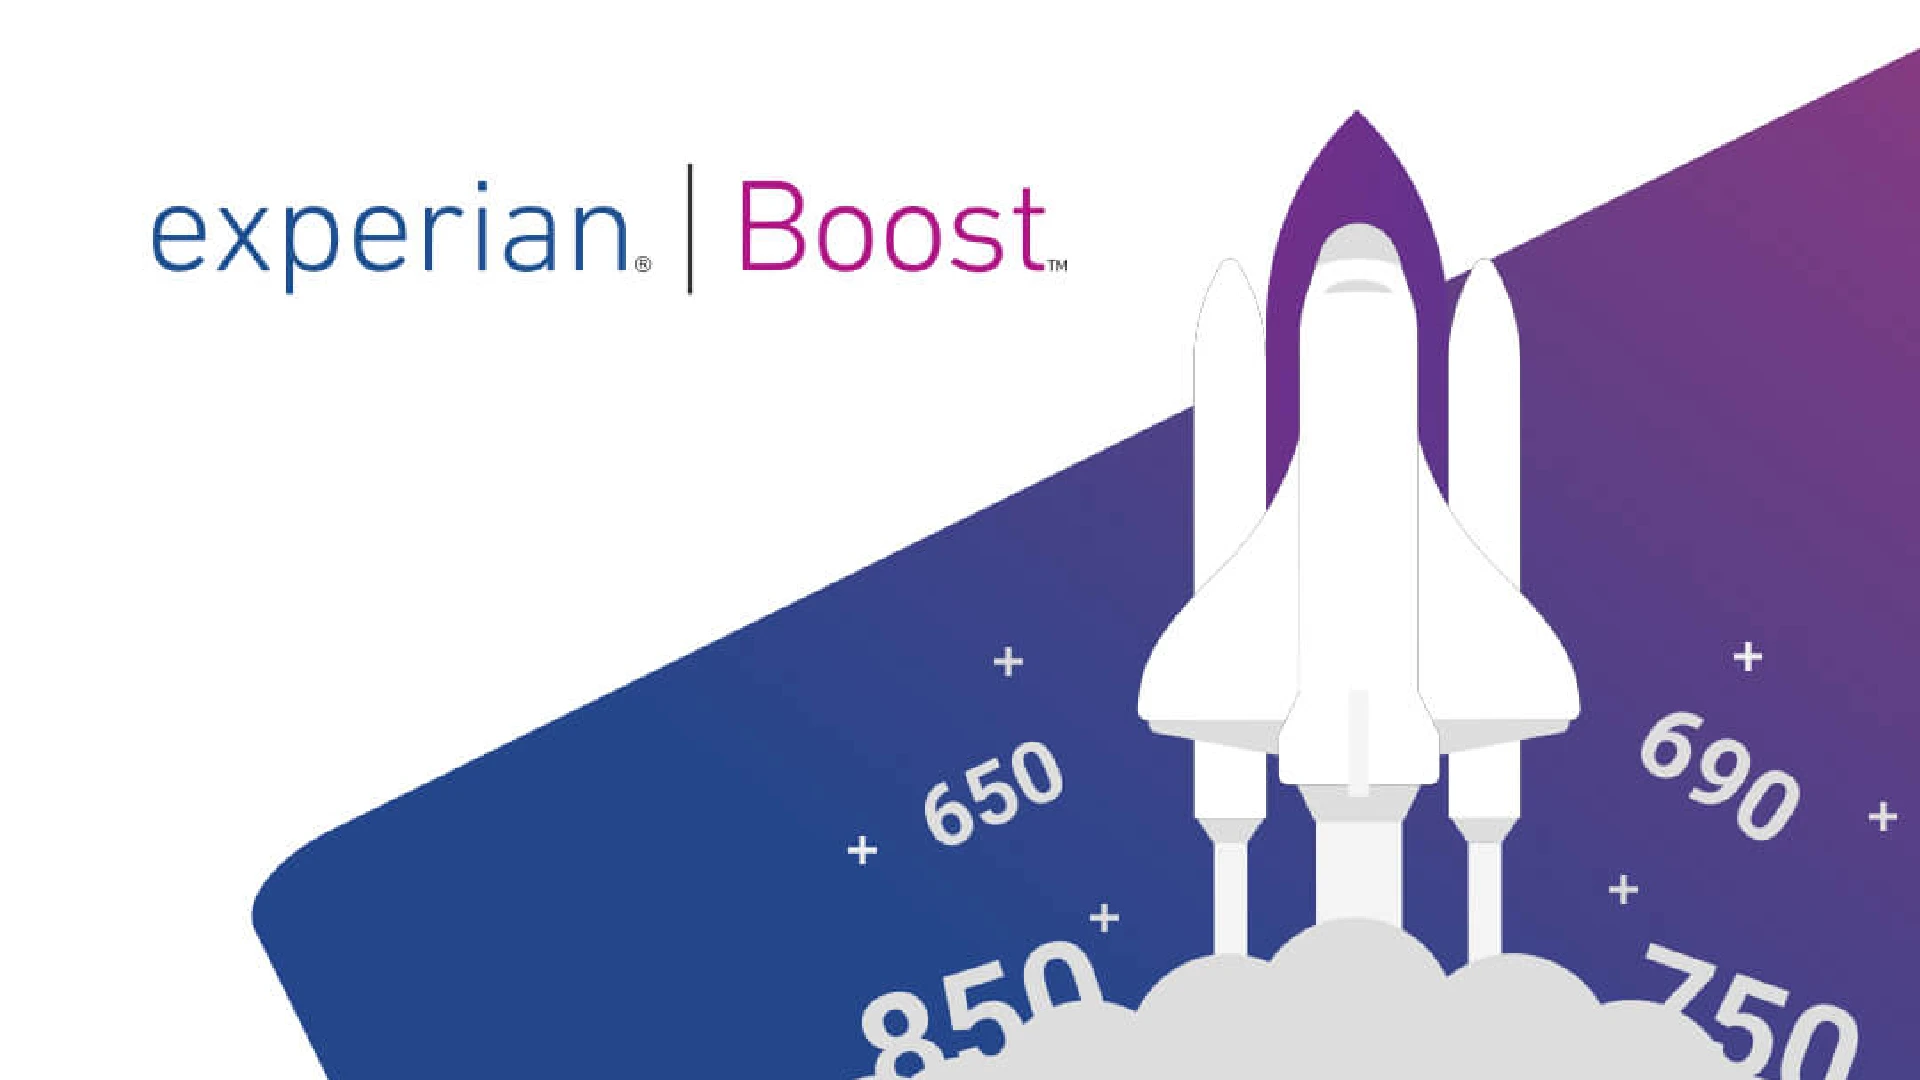 Experian Boost Review: Who Should Use It?